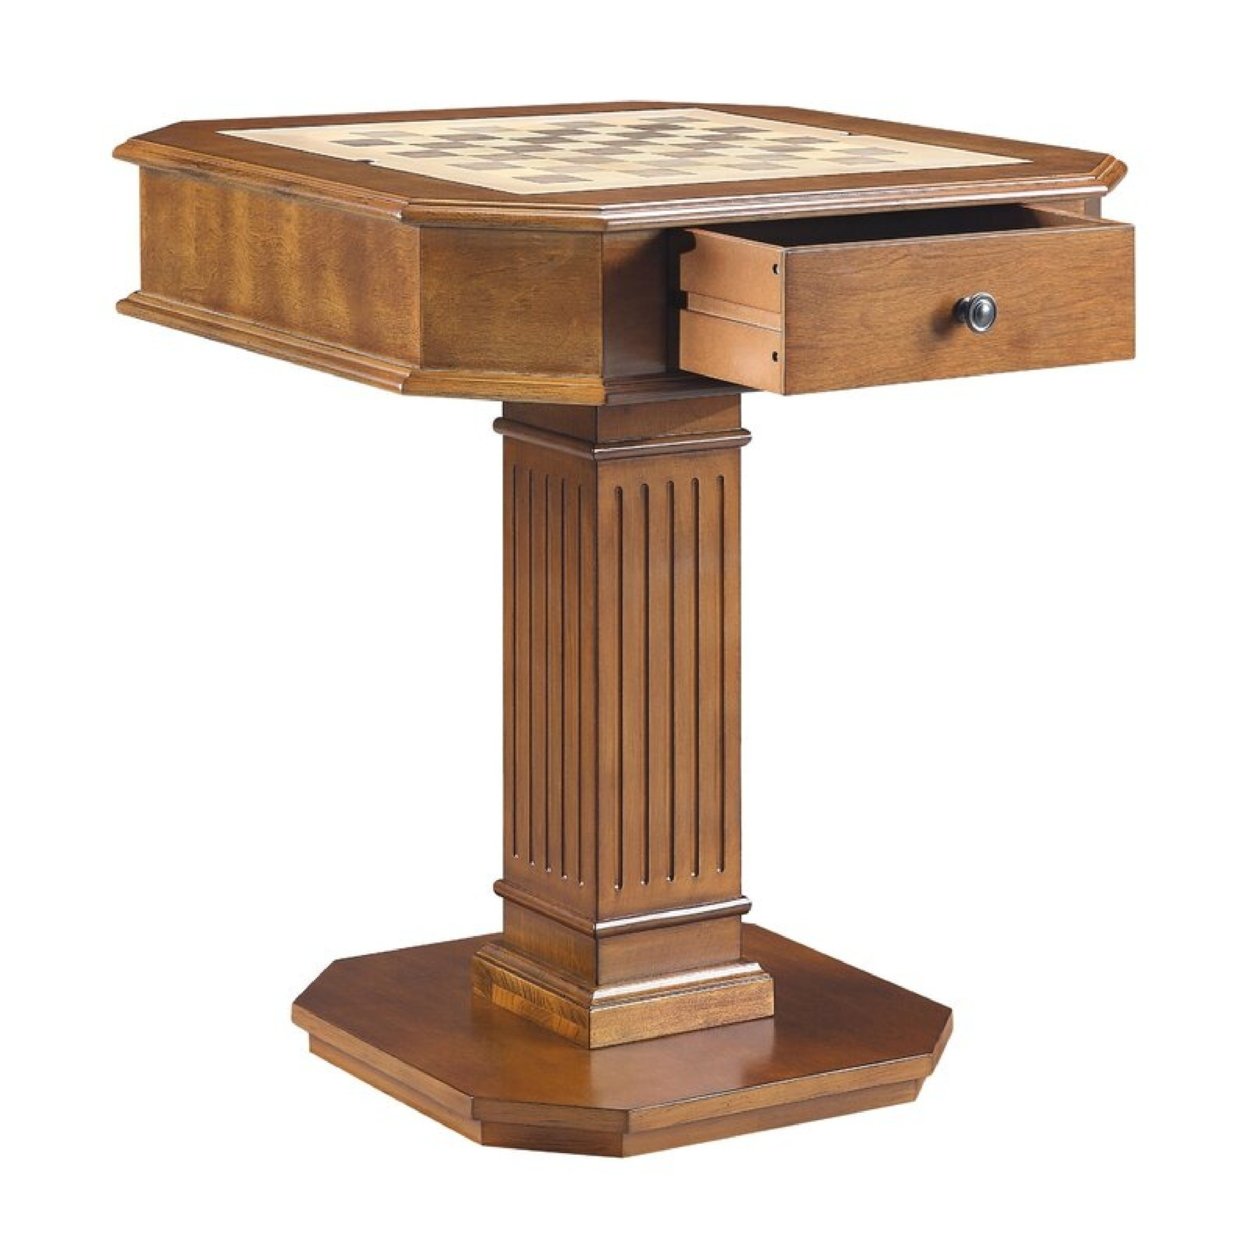 Susy 28 Inch Wood Reversible Board Game Table With Pedestal Stand, Walnut- Saltoro Sherpi